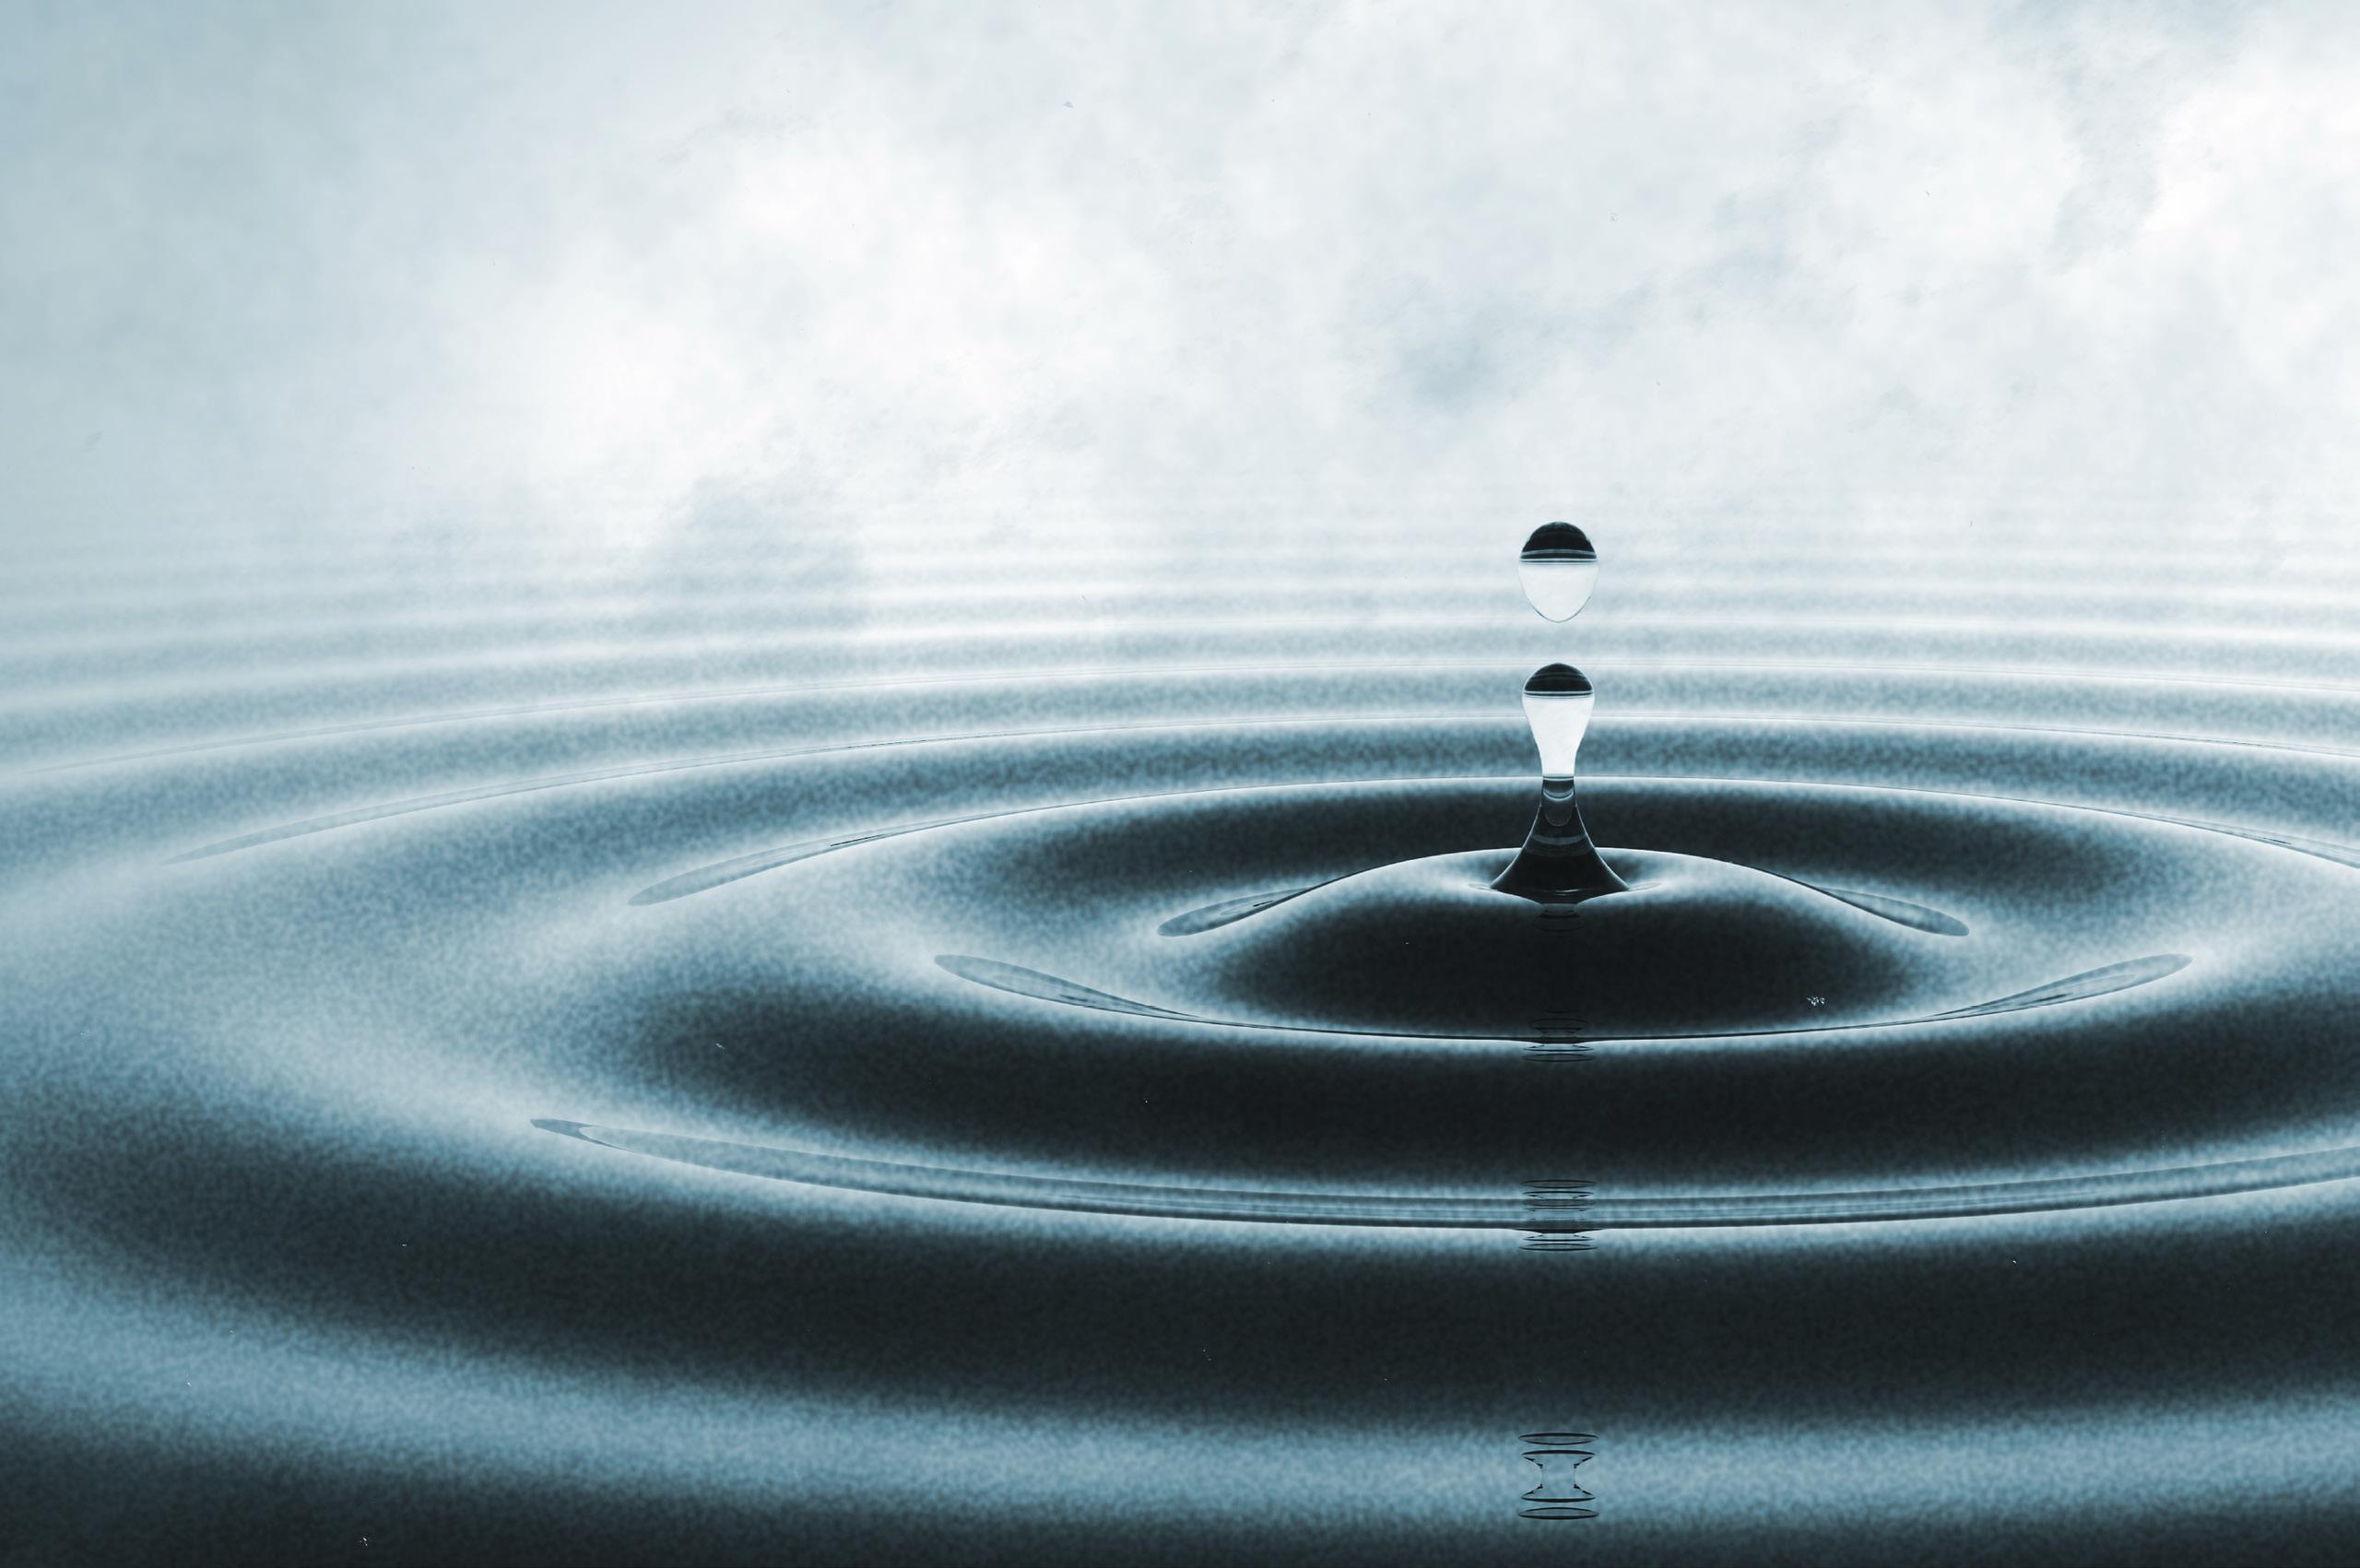 This is an image of a drop of water falling into water making ripples